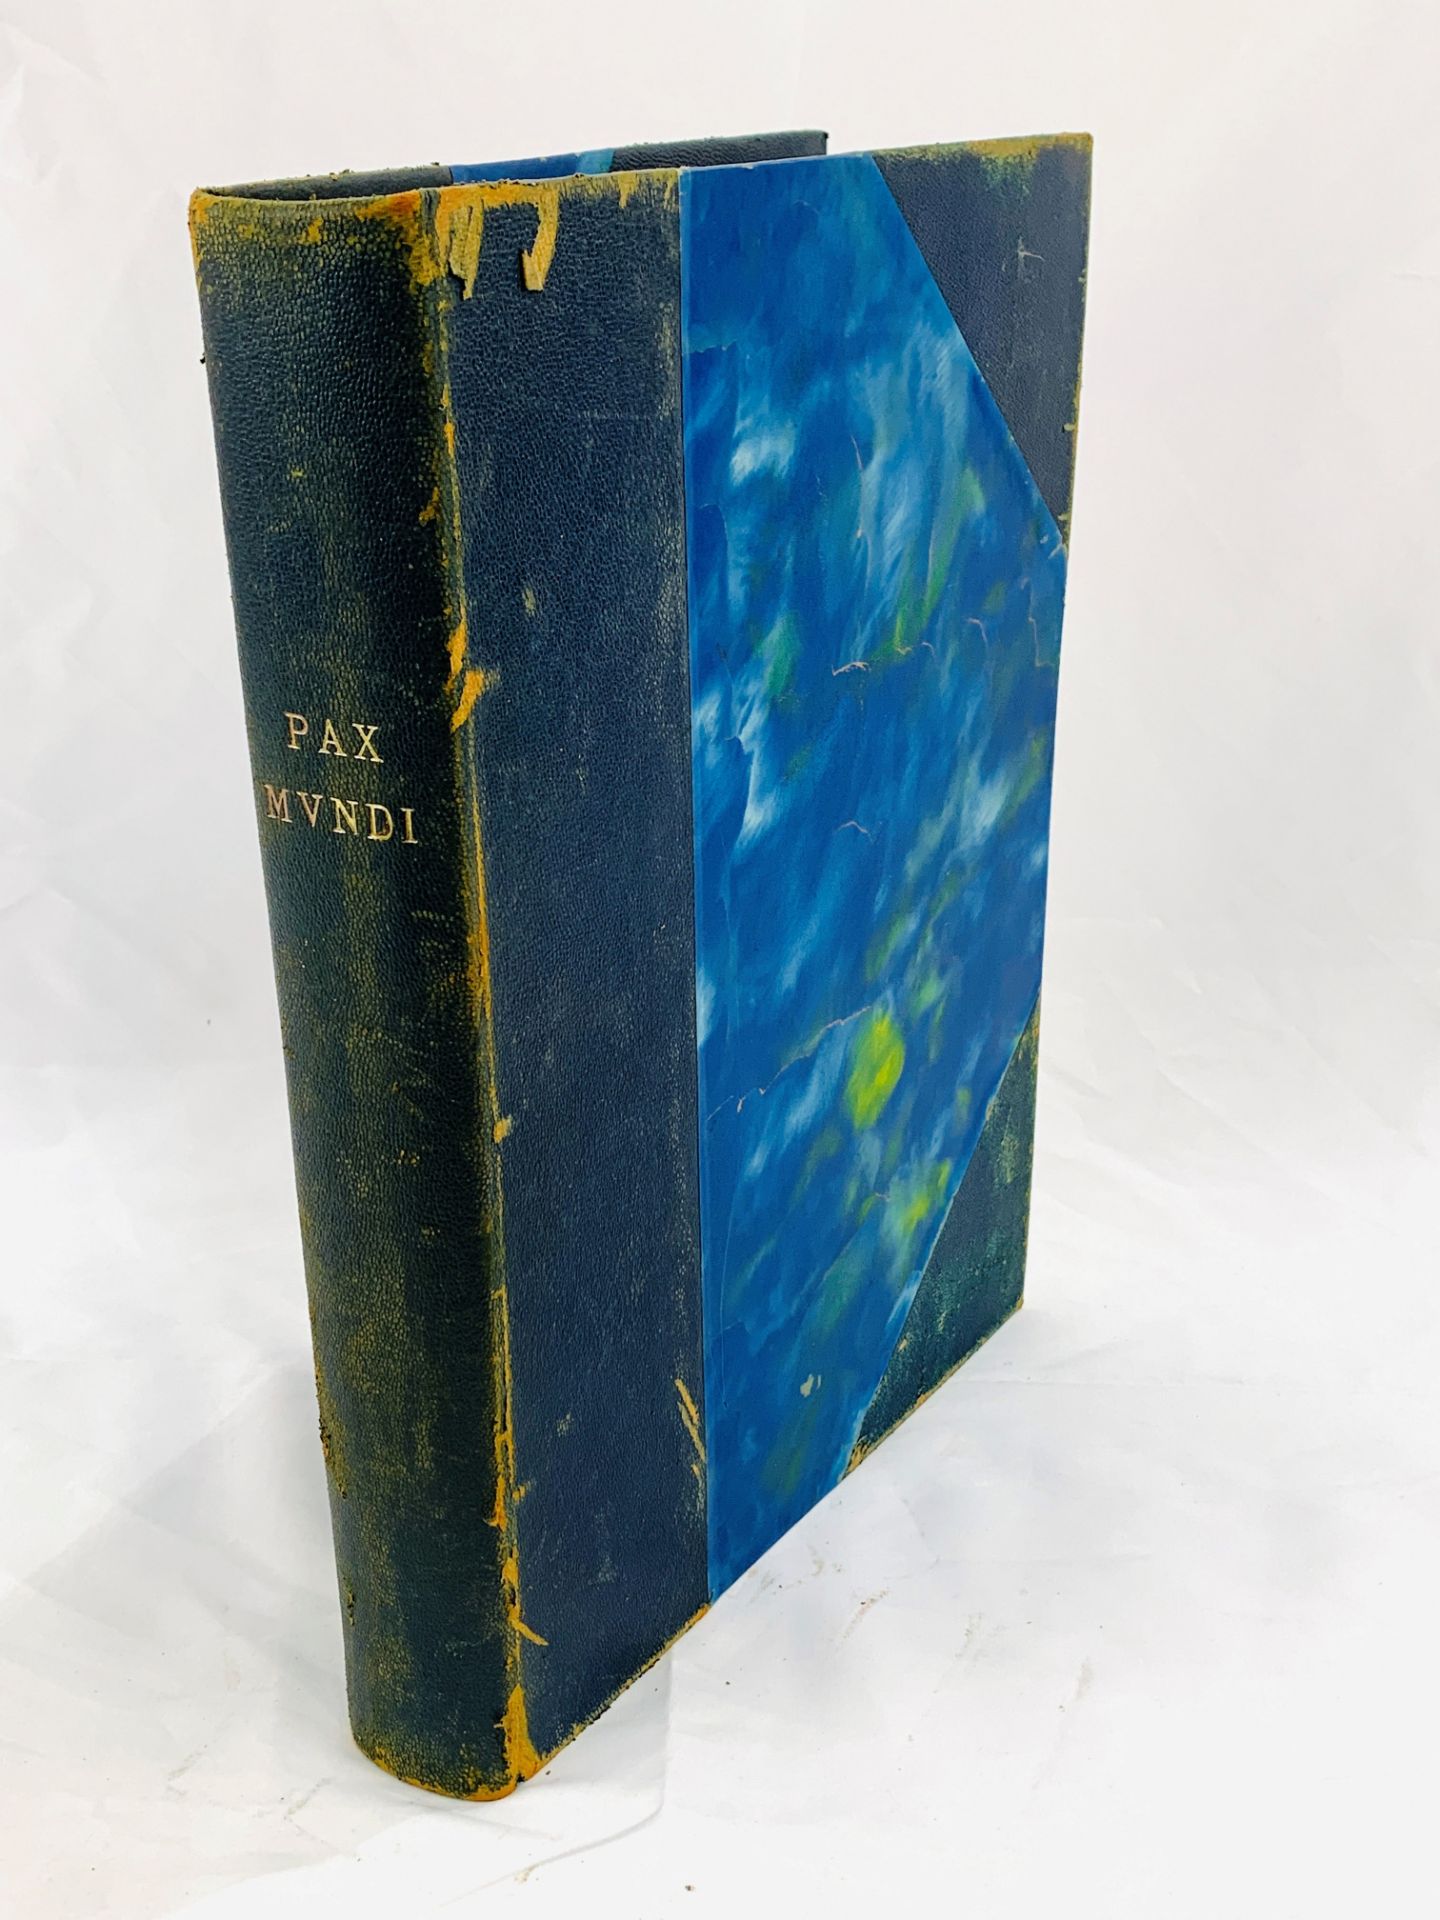 Pax Mundi-Livre D'Or de la Paix: large folio volume created for the society of nations in 1932.